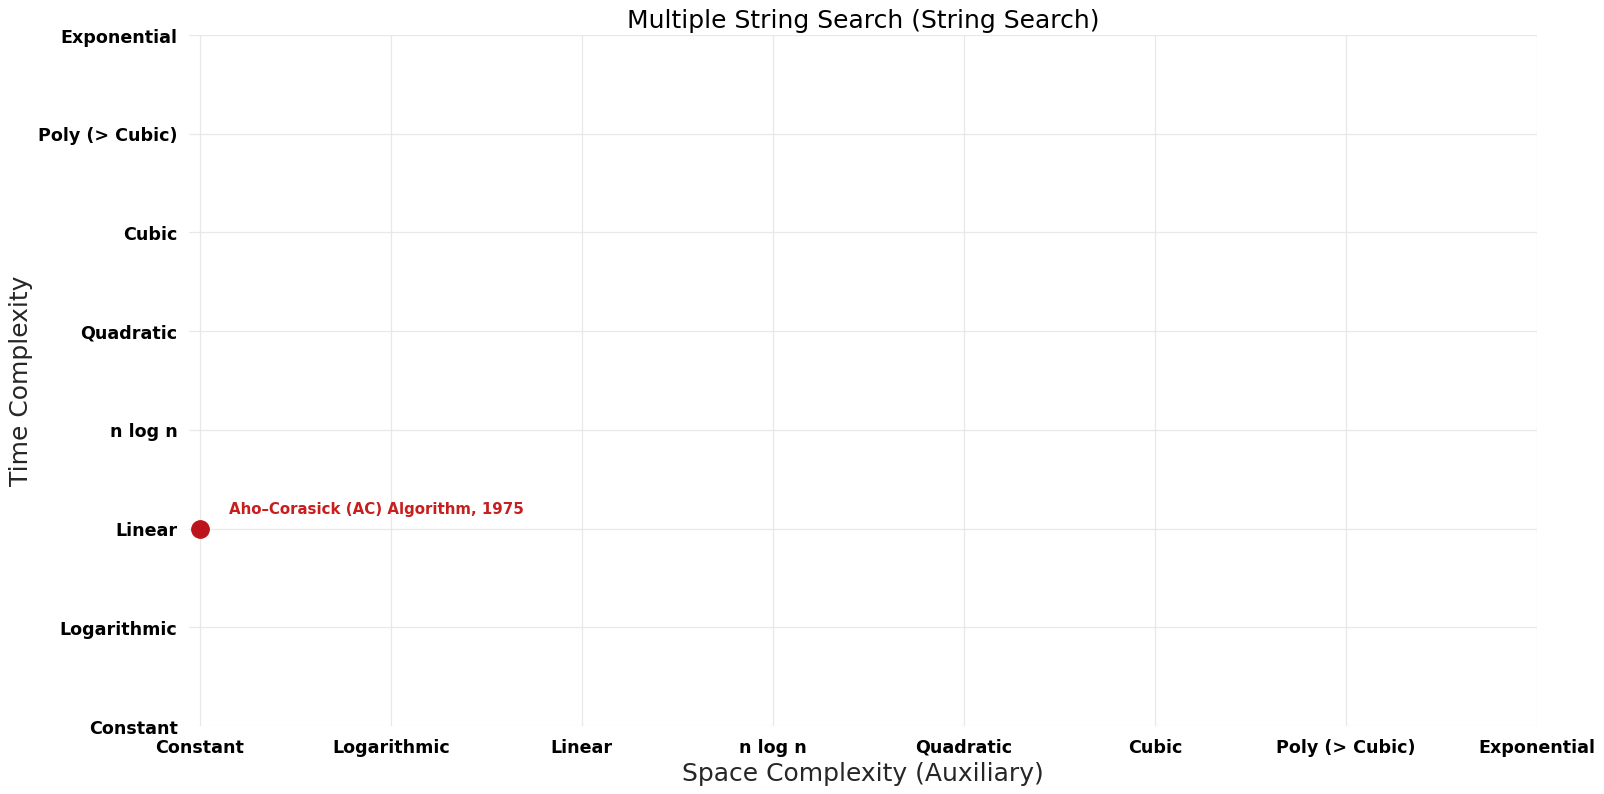 String Search - Multiple String Search - Pareto Frontier.png